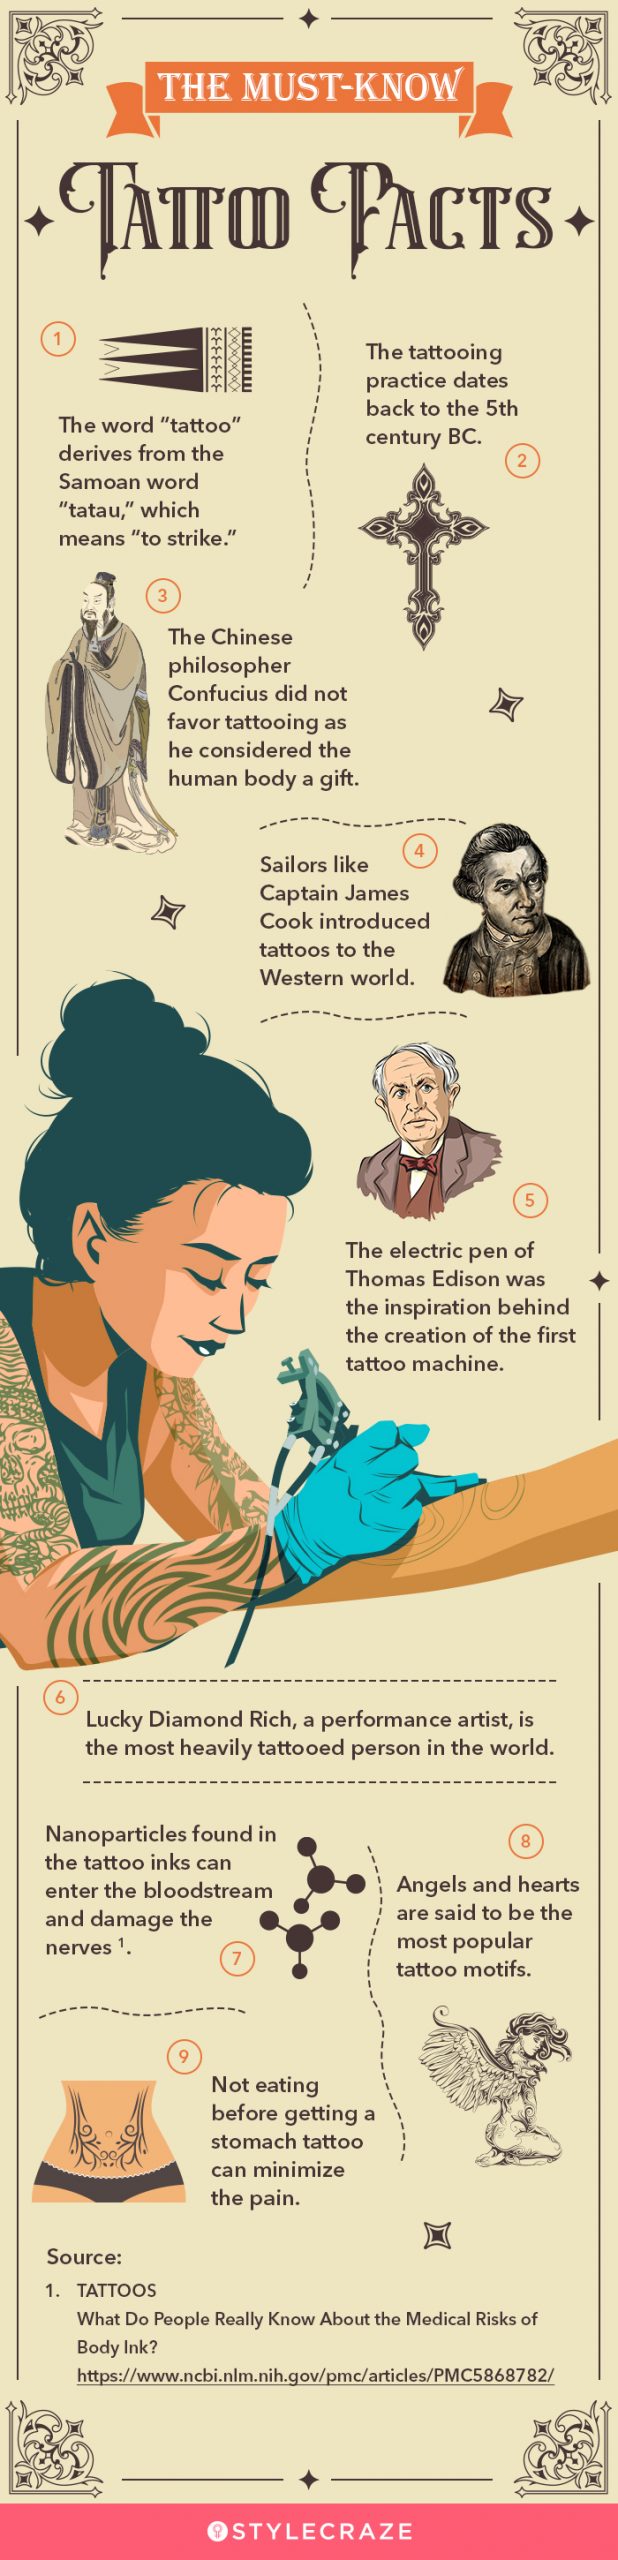 unknown tattoo facts (infographic)